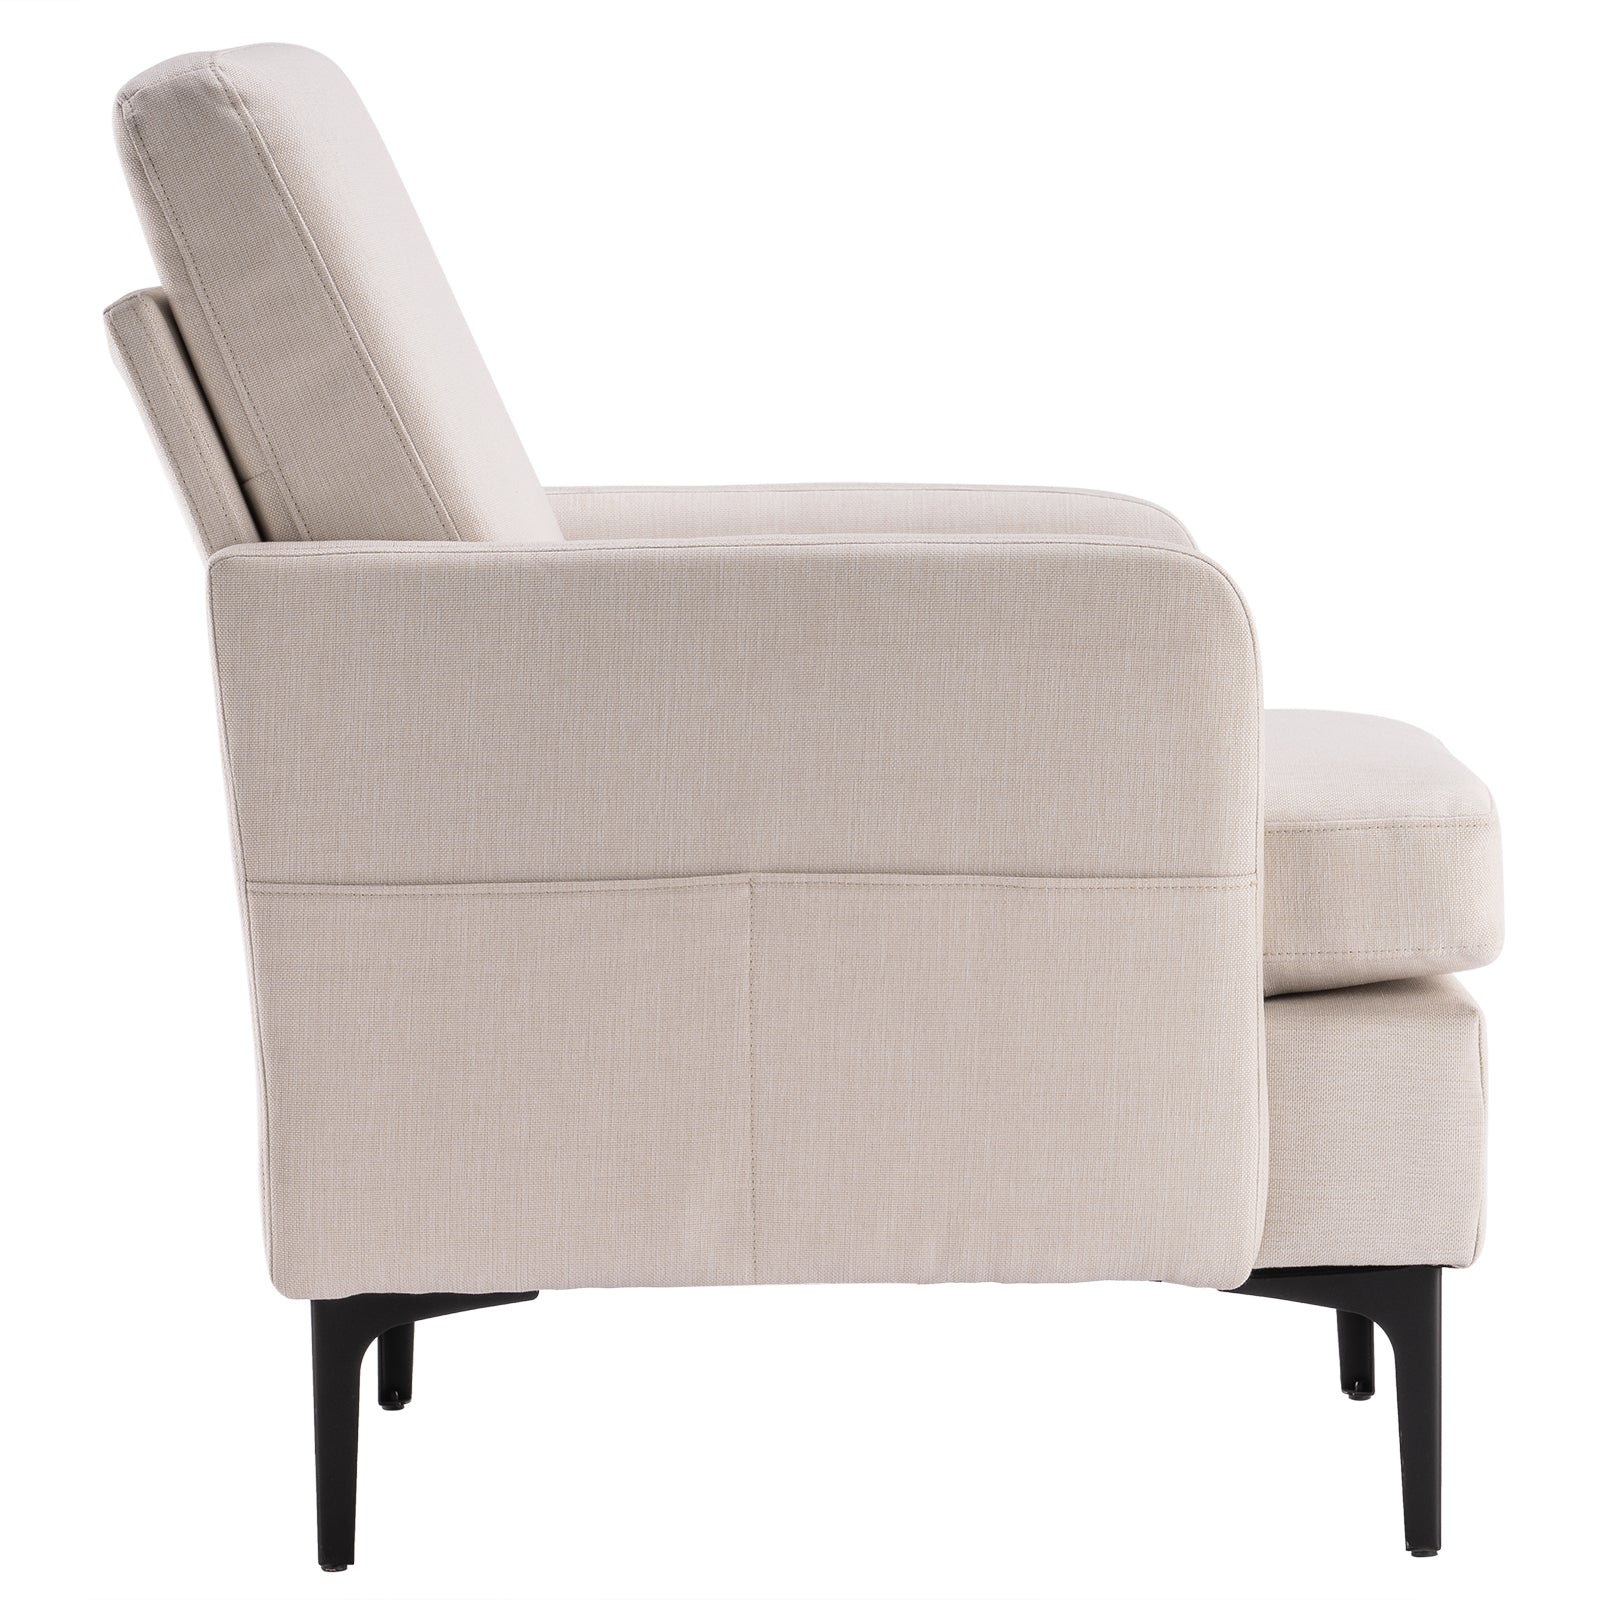 ZNTS Lounge Chair, Comfy Single Sofa Accent Chair for Bedroom Living Room Guestroom, Beige 30199746